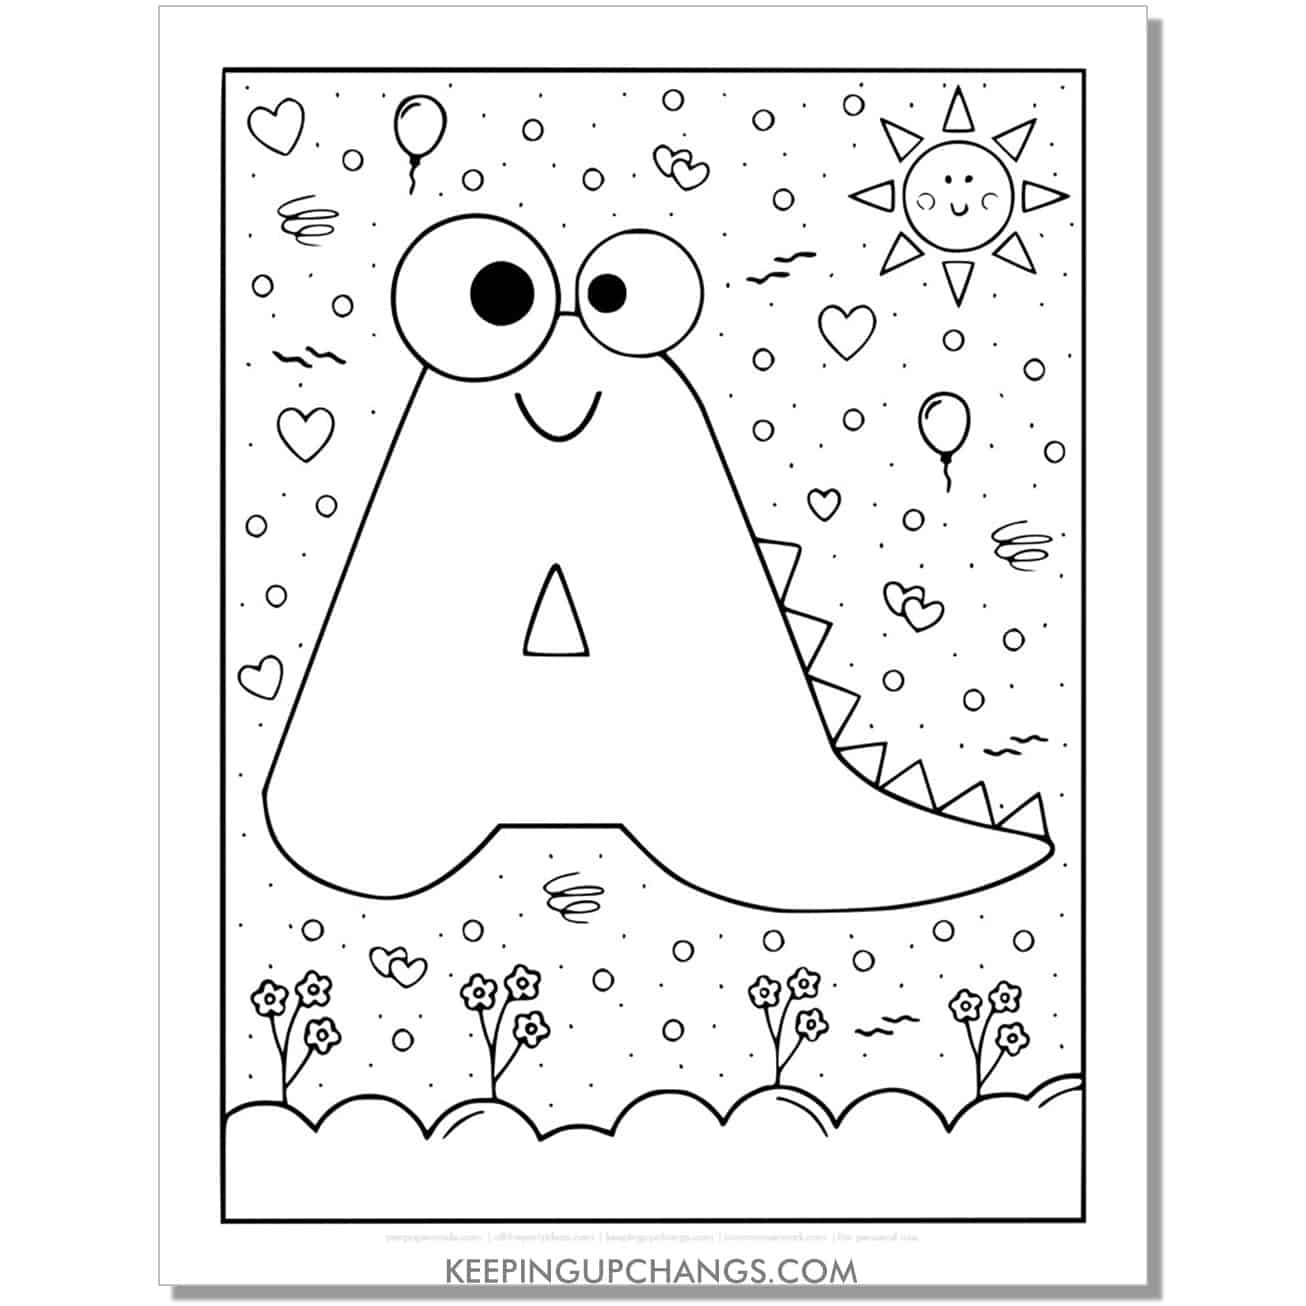 cute a coloring page with monster dinosaur letter.